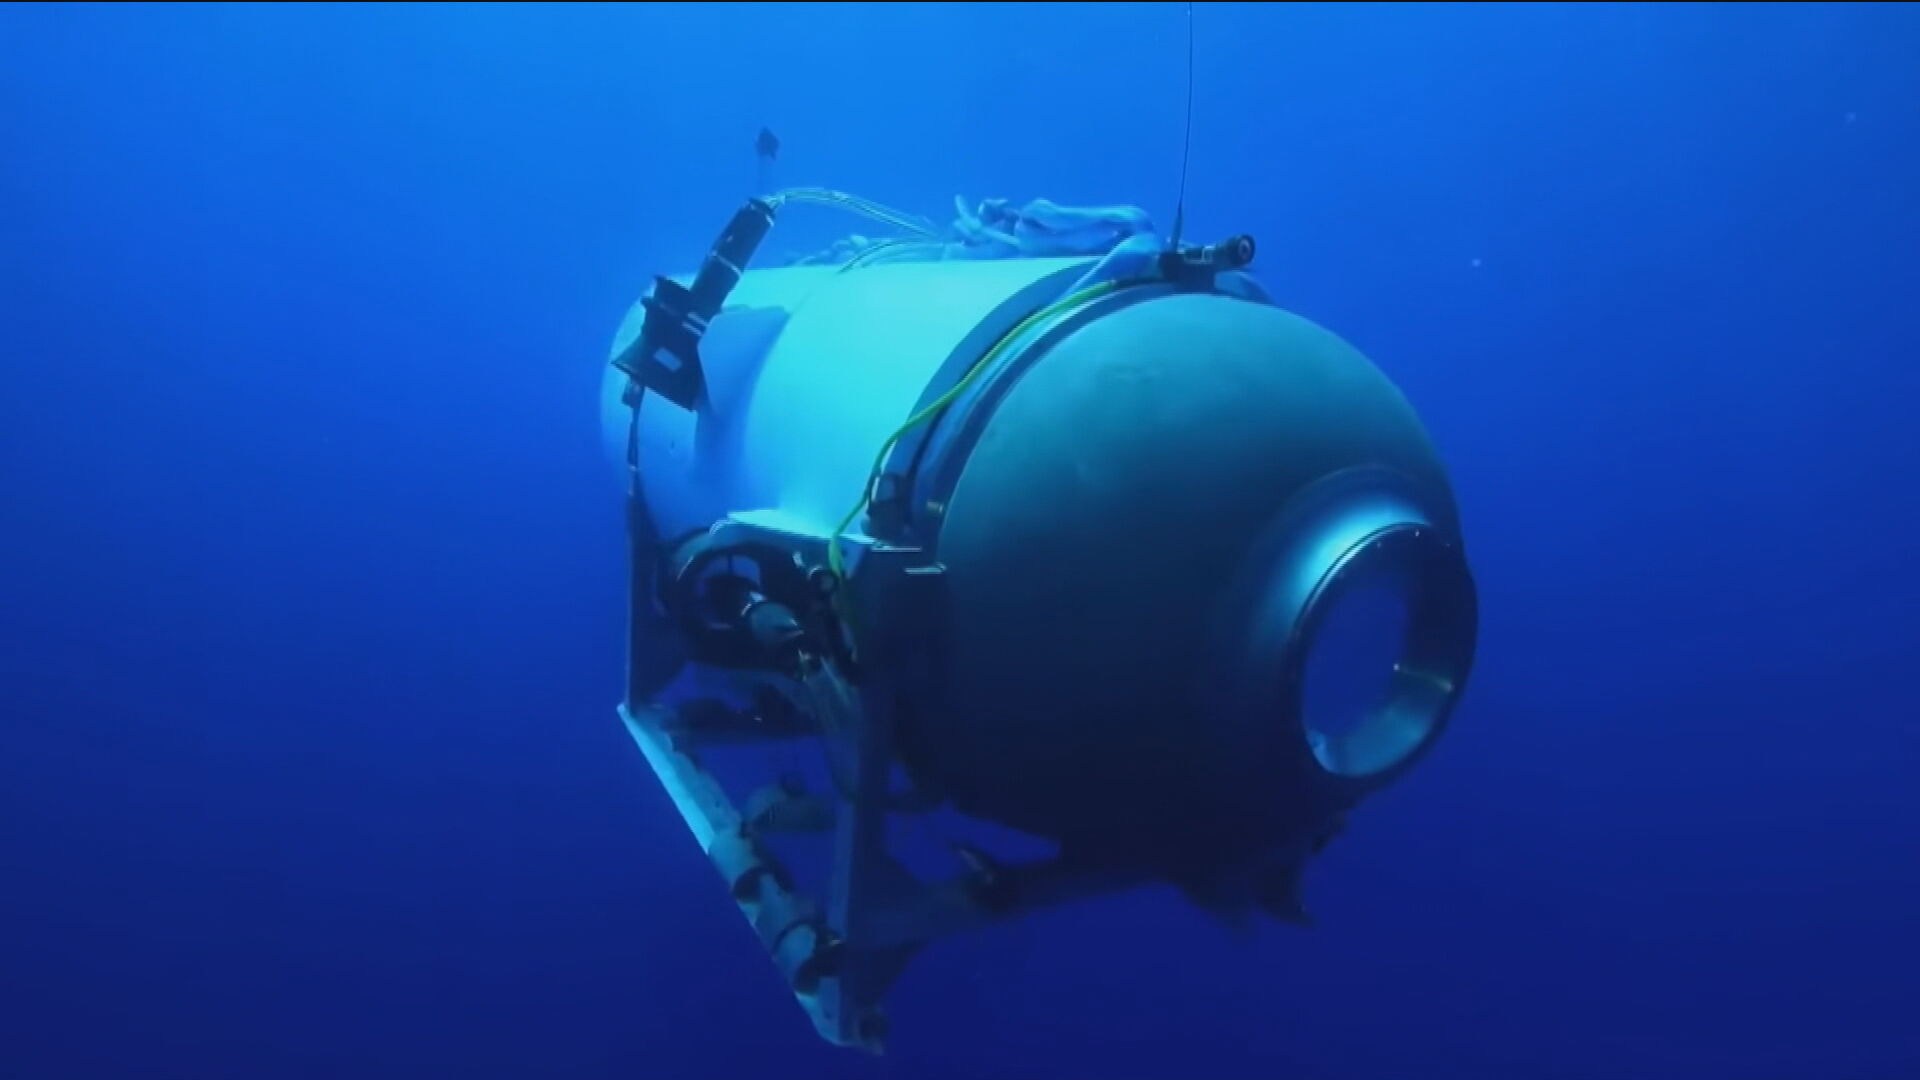 Concerns had previously been raised about the safety of the Titan sub.